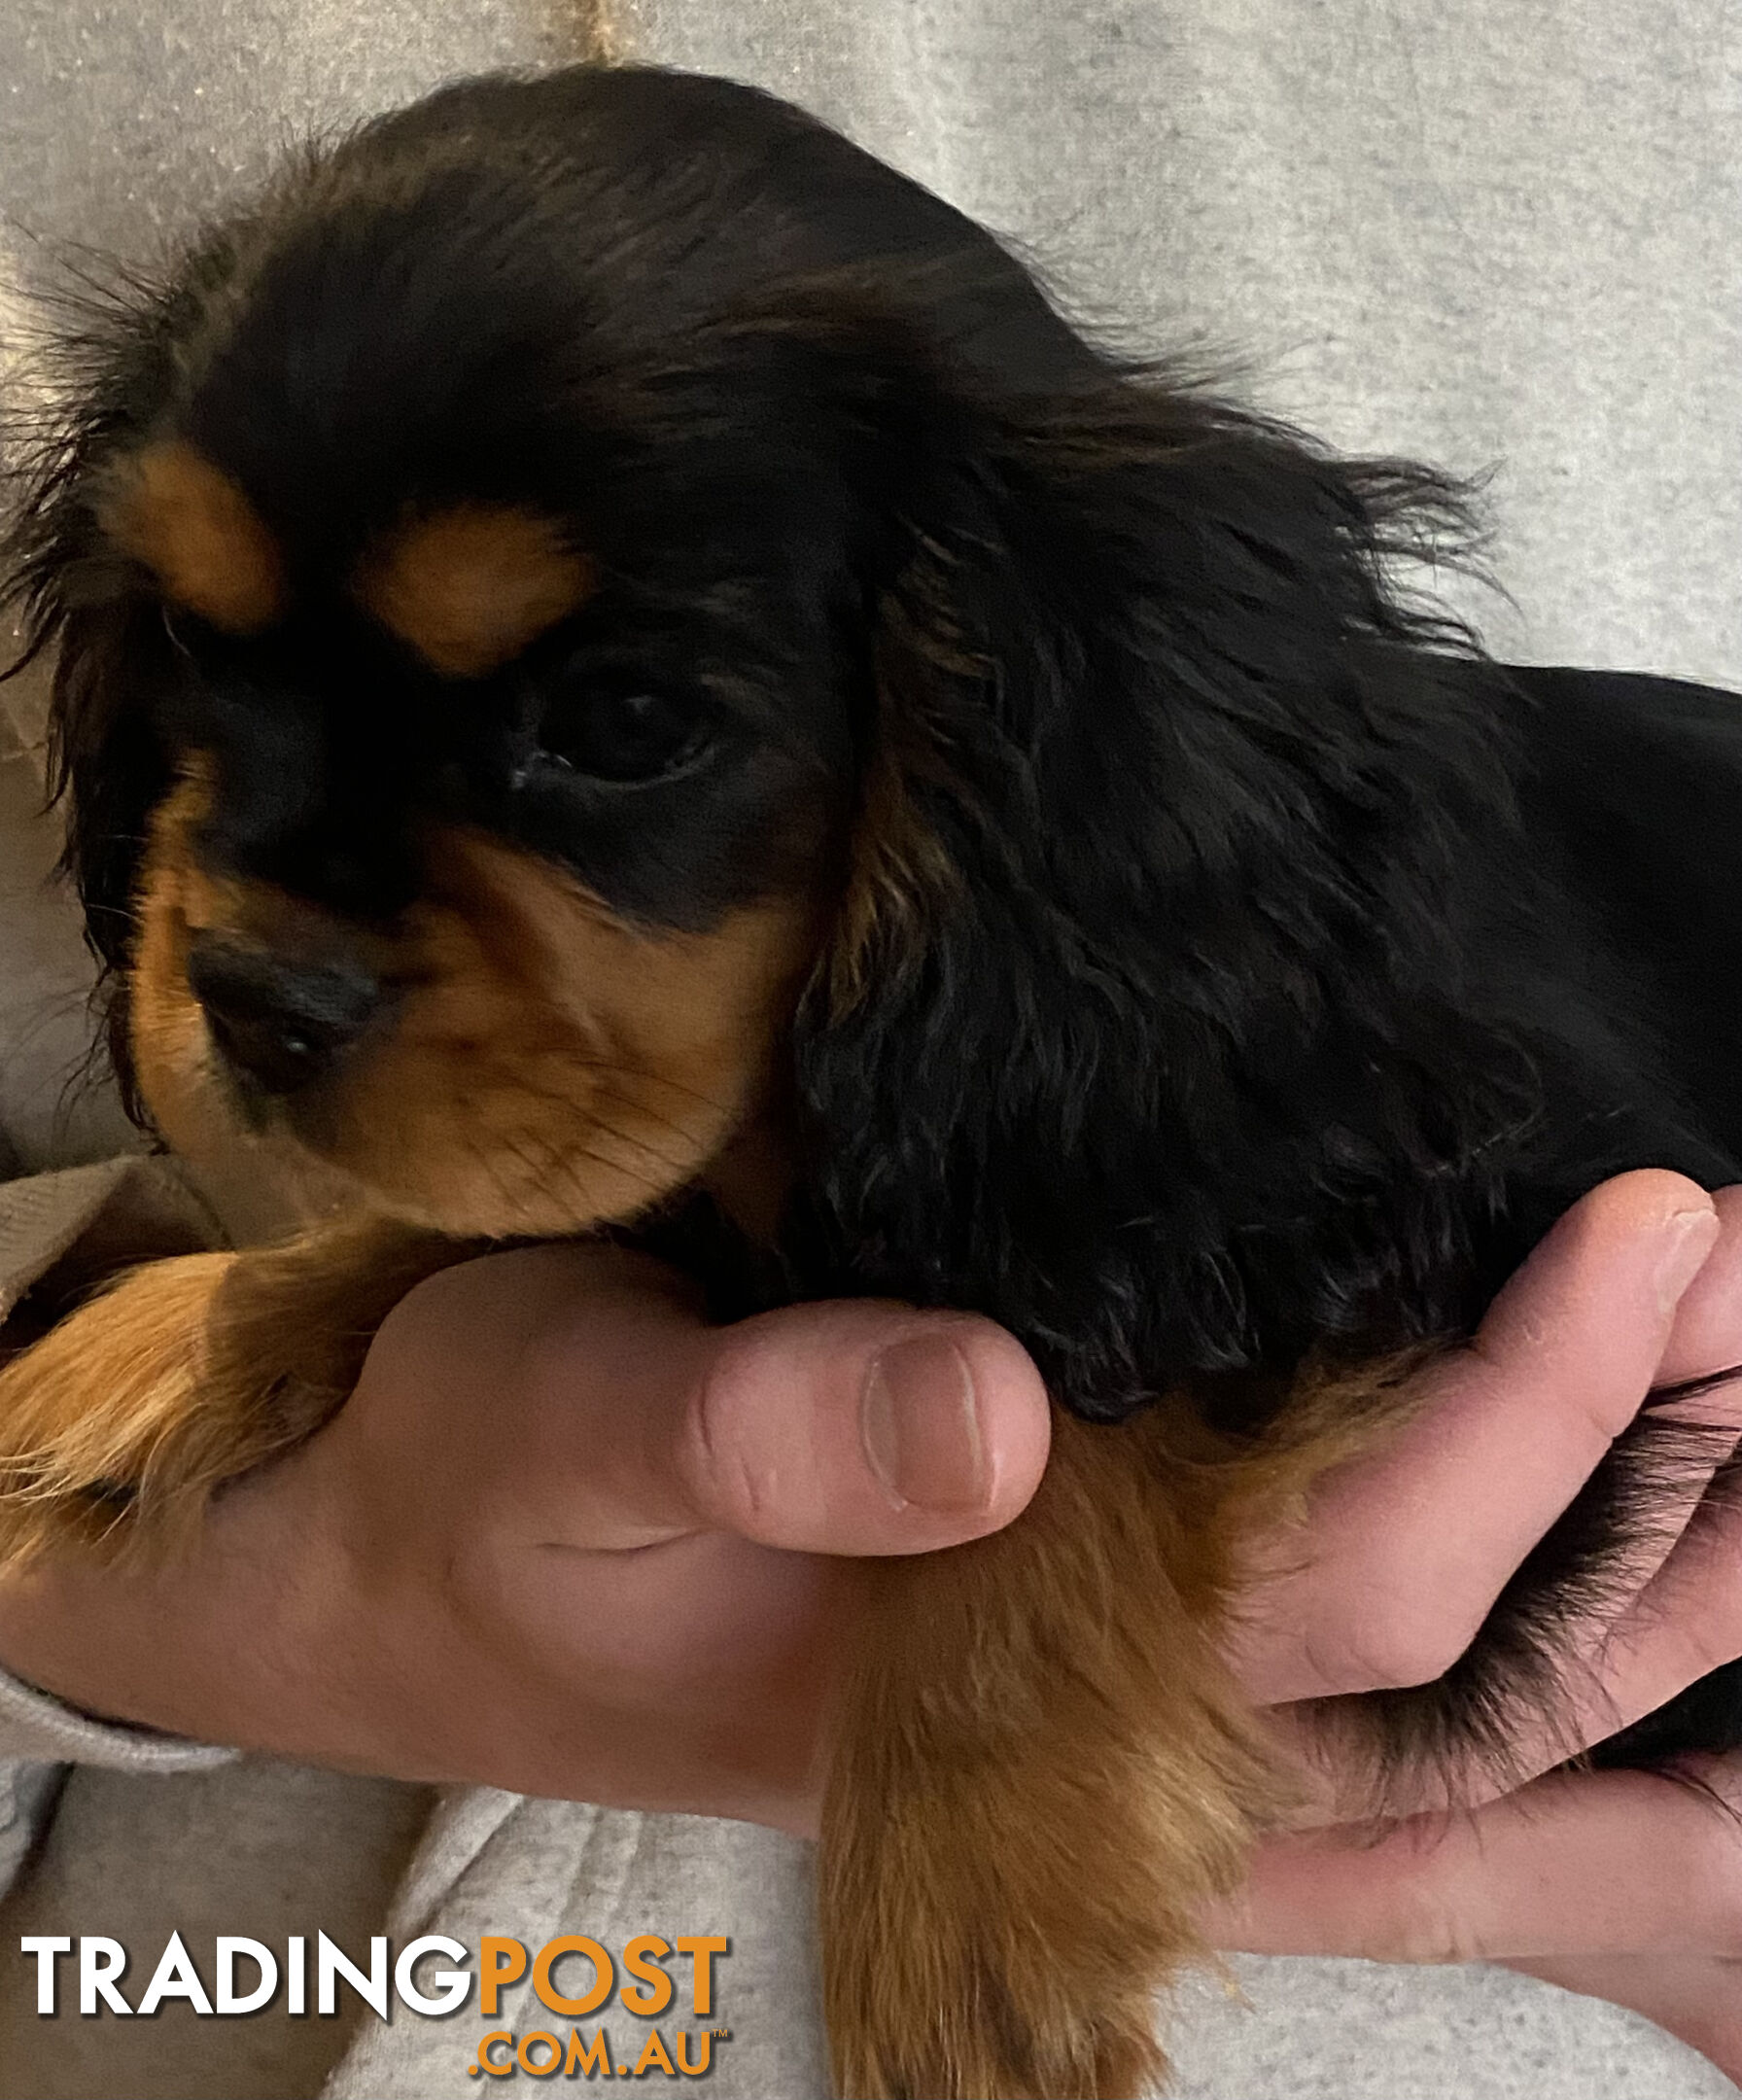 Cavalier King Charles Spaniel Puppies ready now!